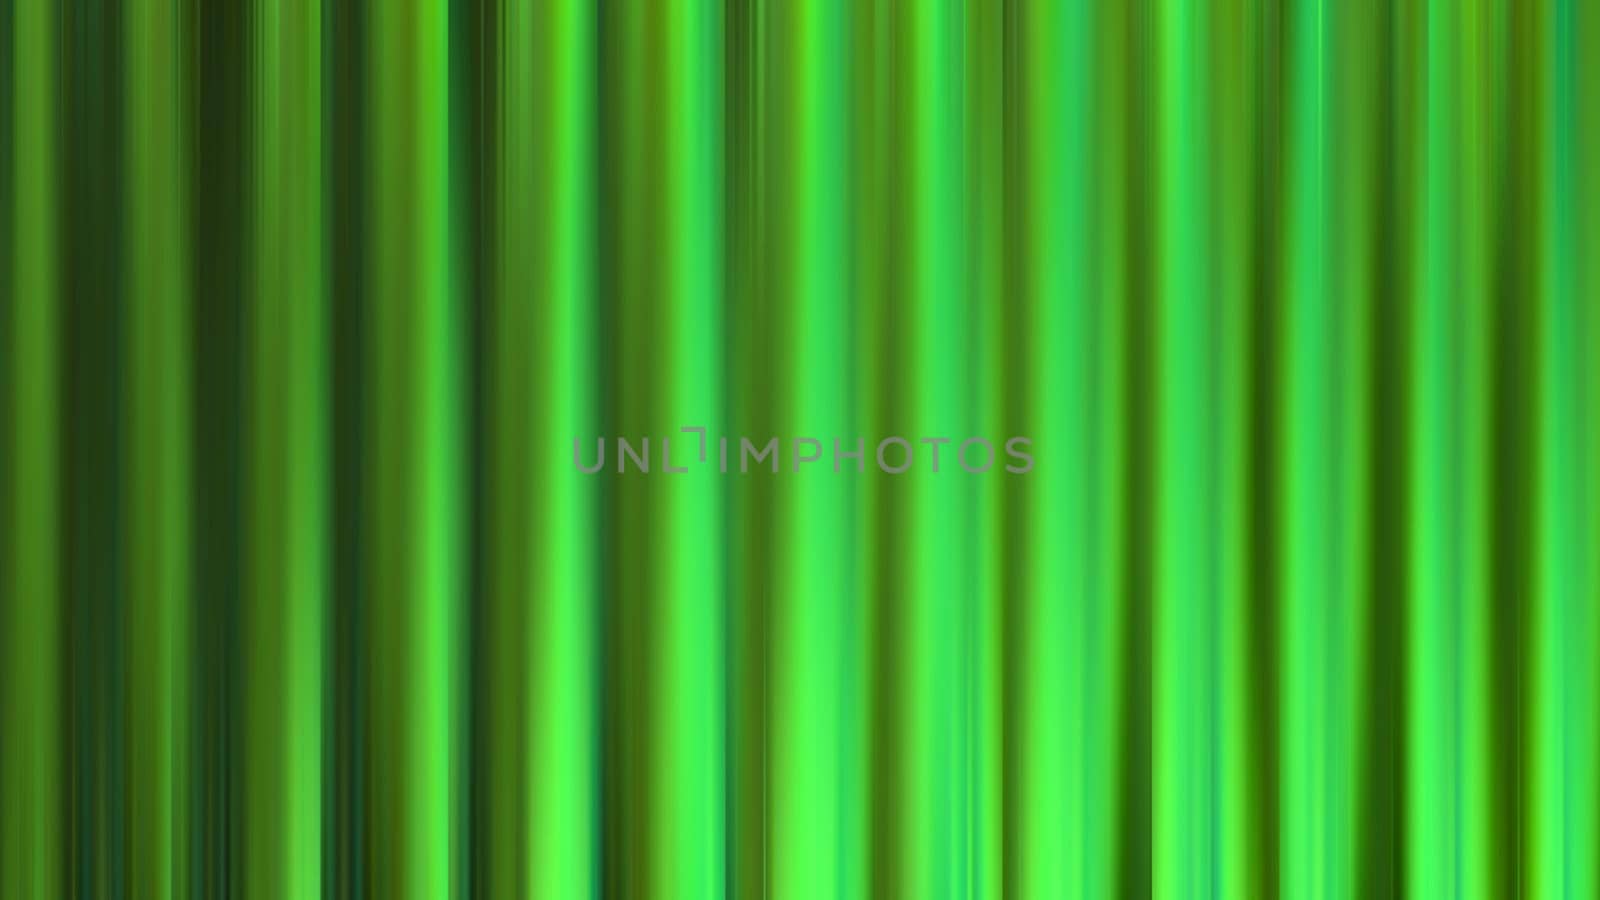 Abstract gradient linear glowing green background. Design, art